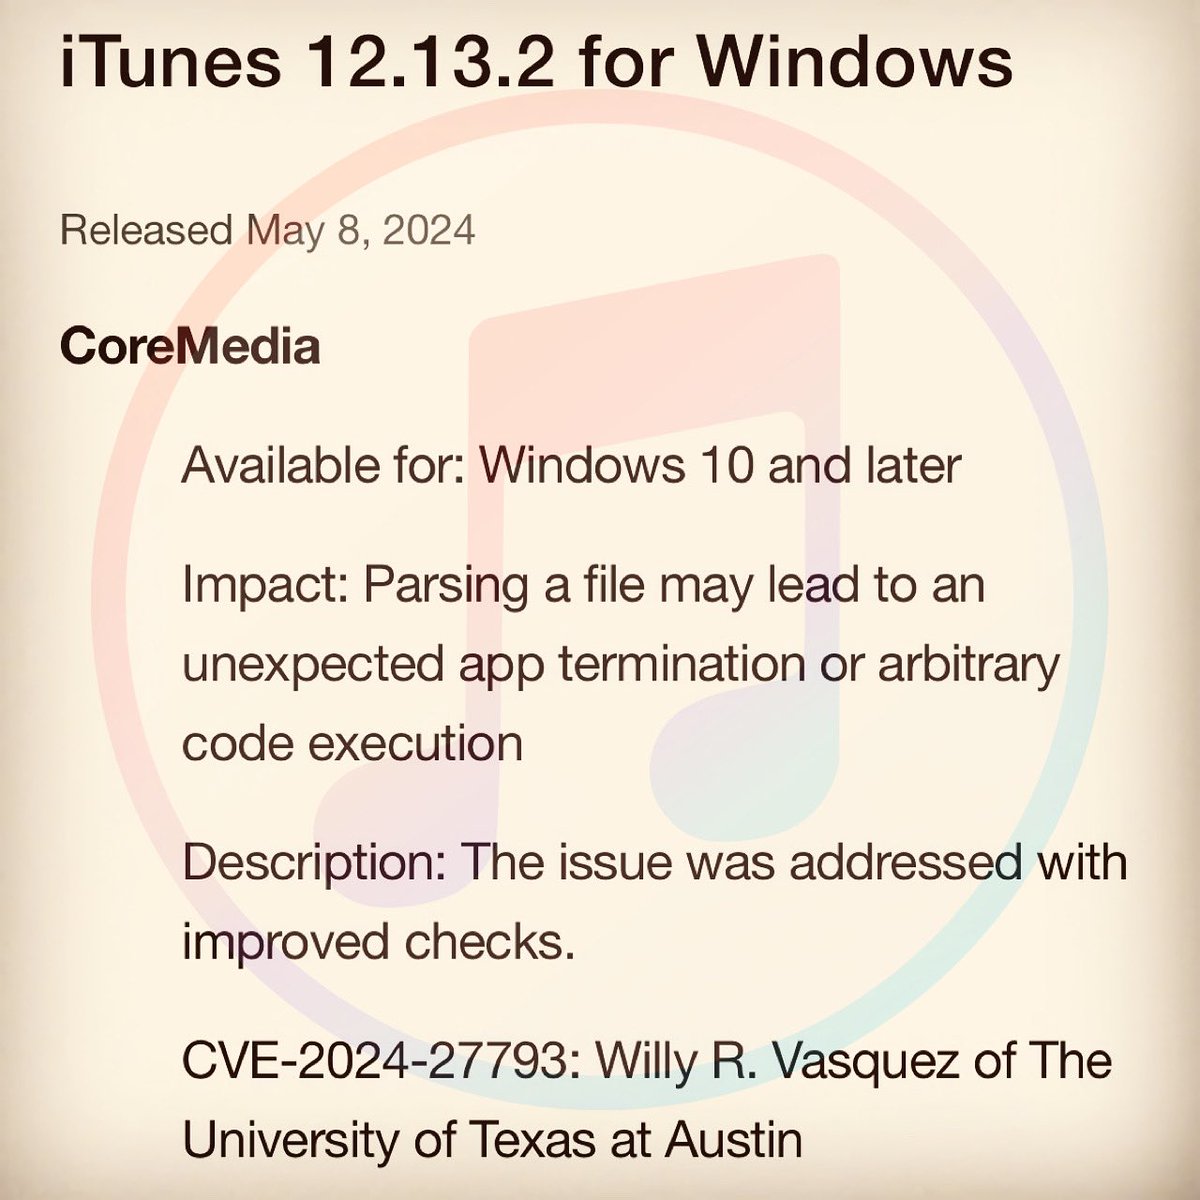 Apple just released a security update. For iTunes. On Windows. 🤨 Apple split up iTunes for macOS into separate apps in 2019, and did the same for Windows in 2024—but for now, the latter evidently gets patches. CVE-2024-27793: unexpected app termination/arbitrary code execution